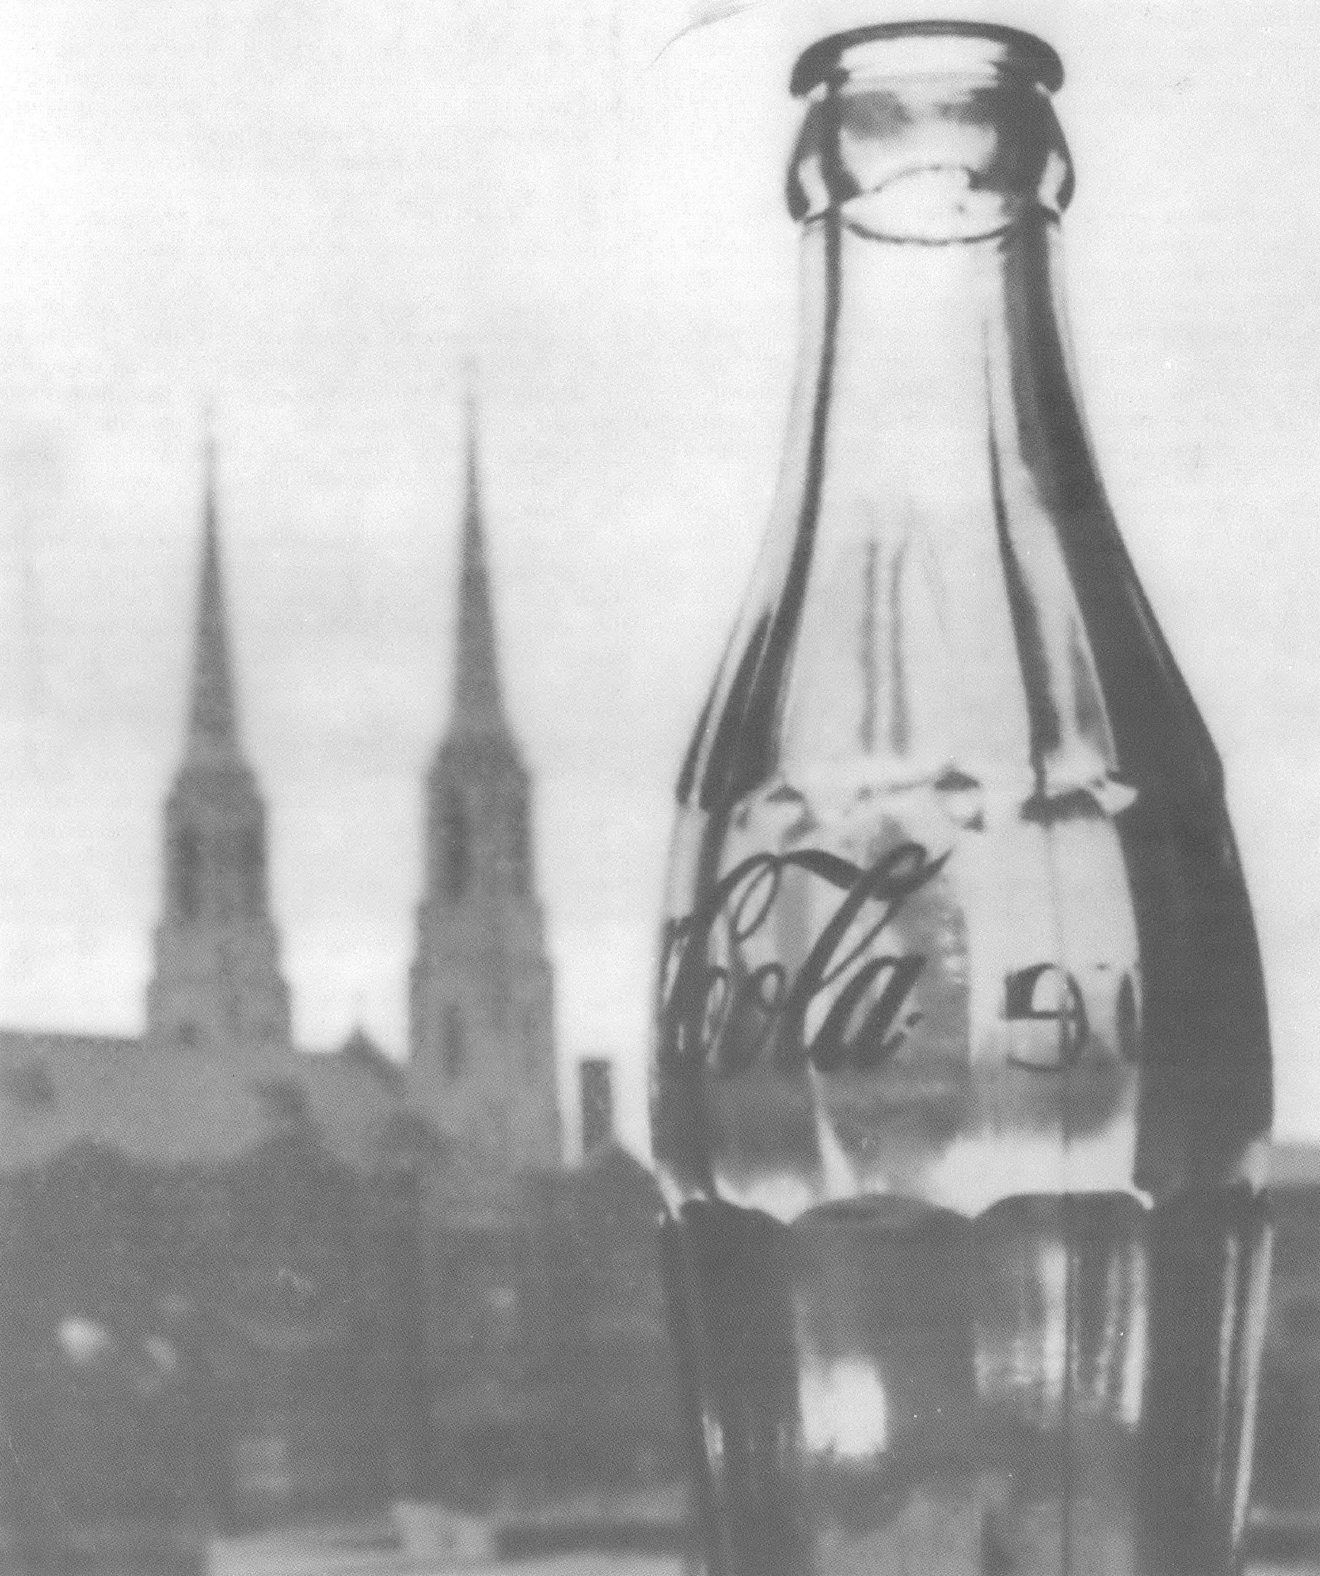 Black and white image of glass Coca-Cola bottle in front of church with two steeples